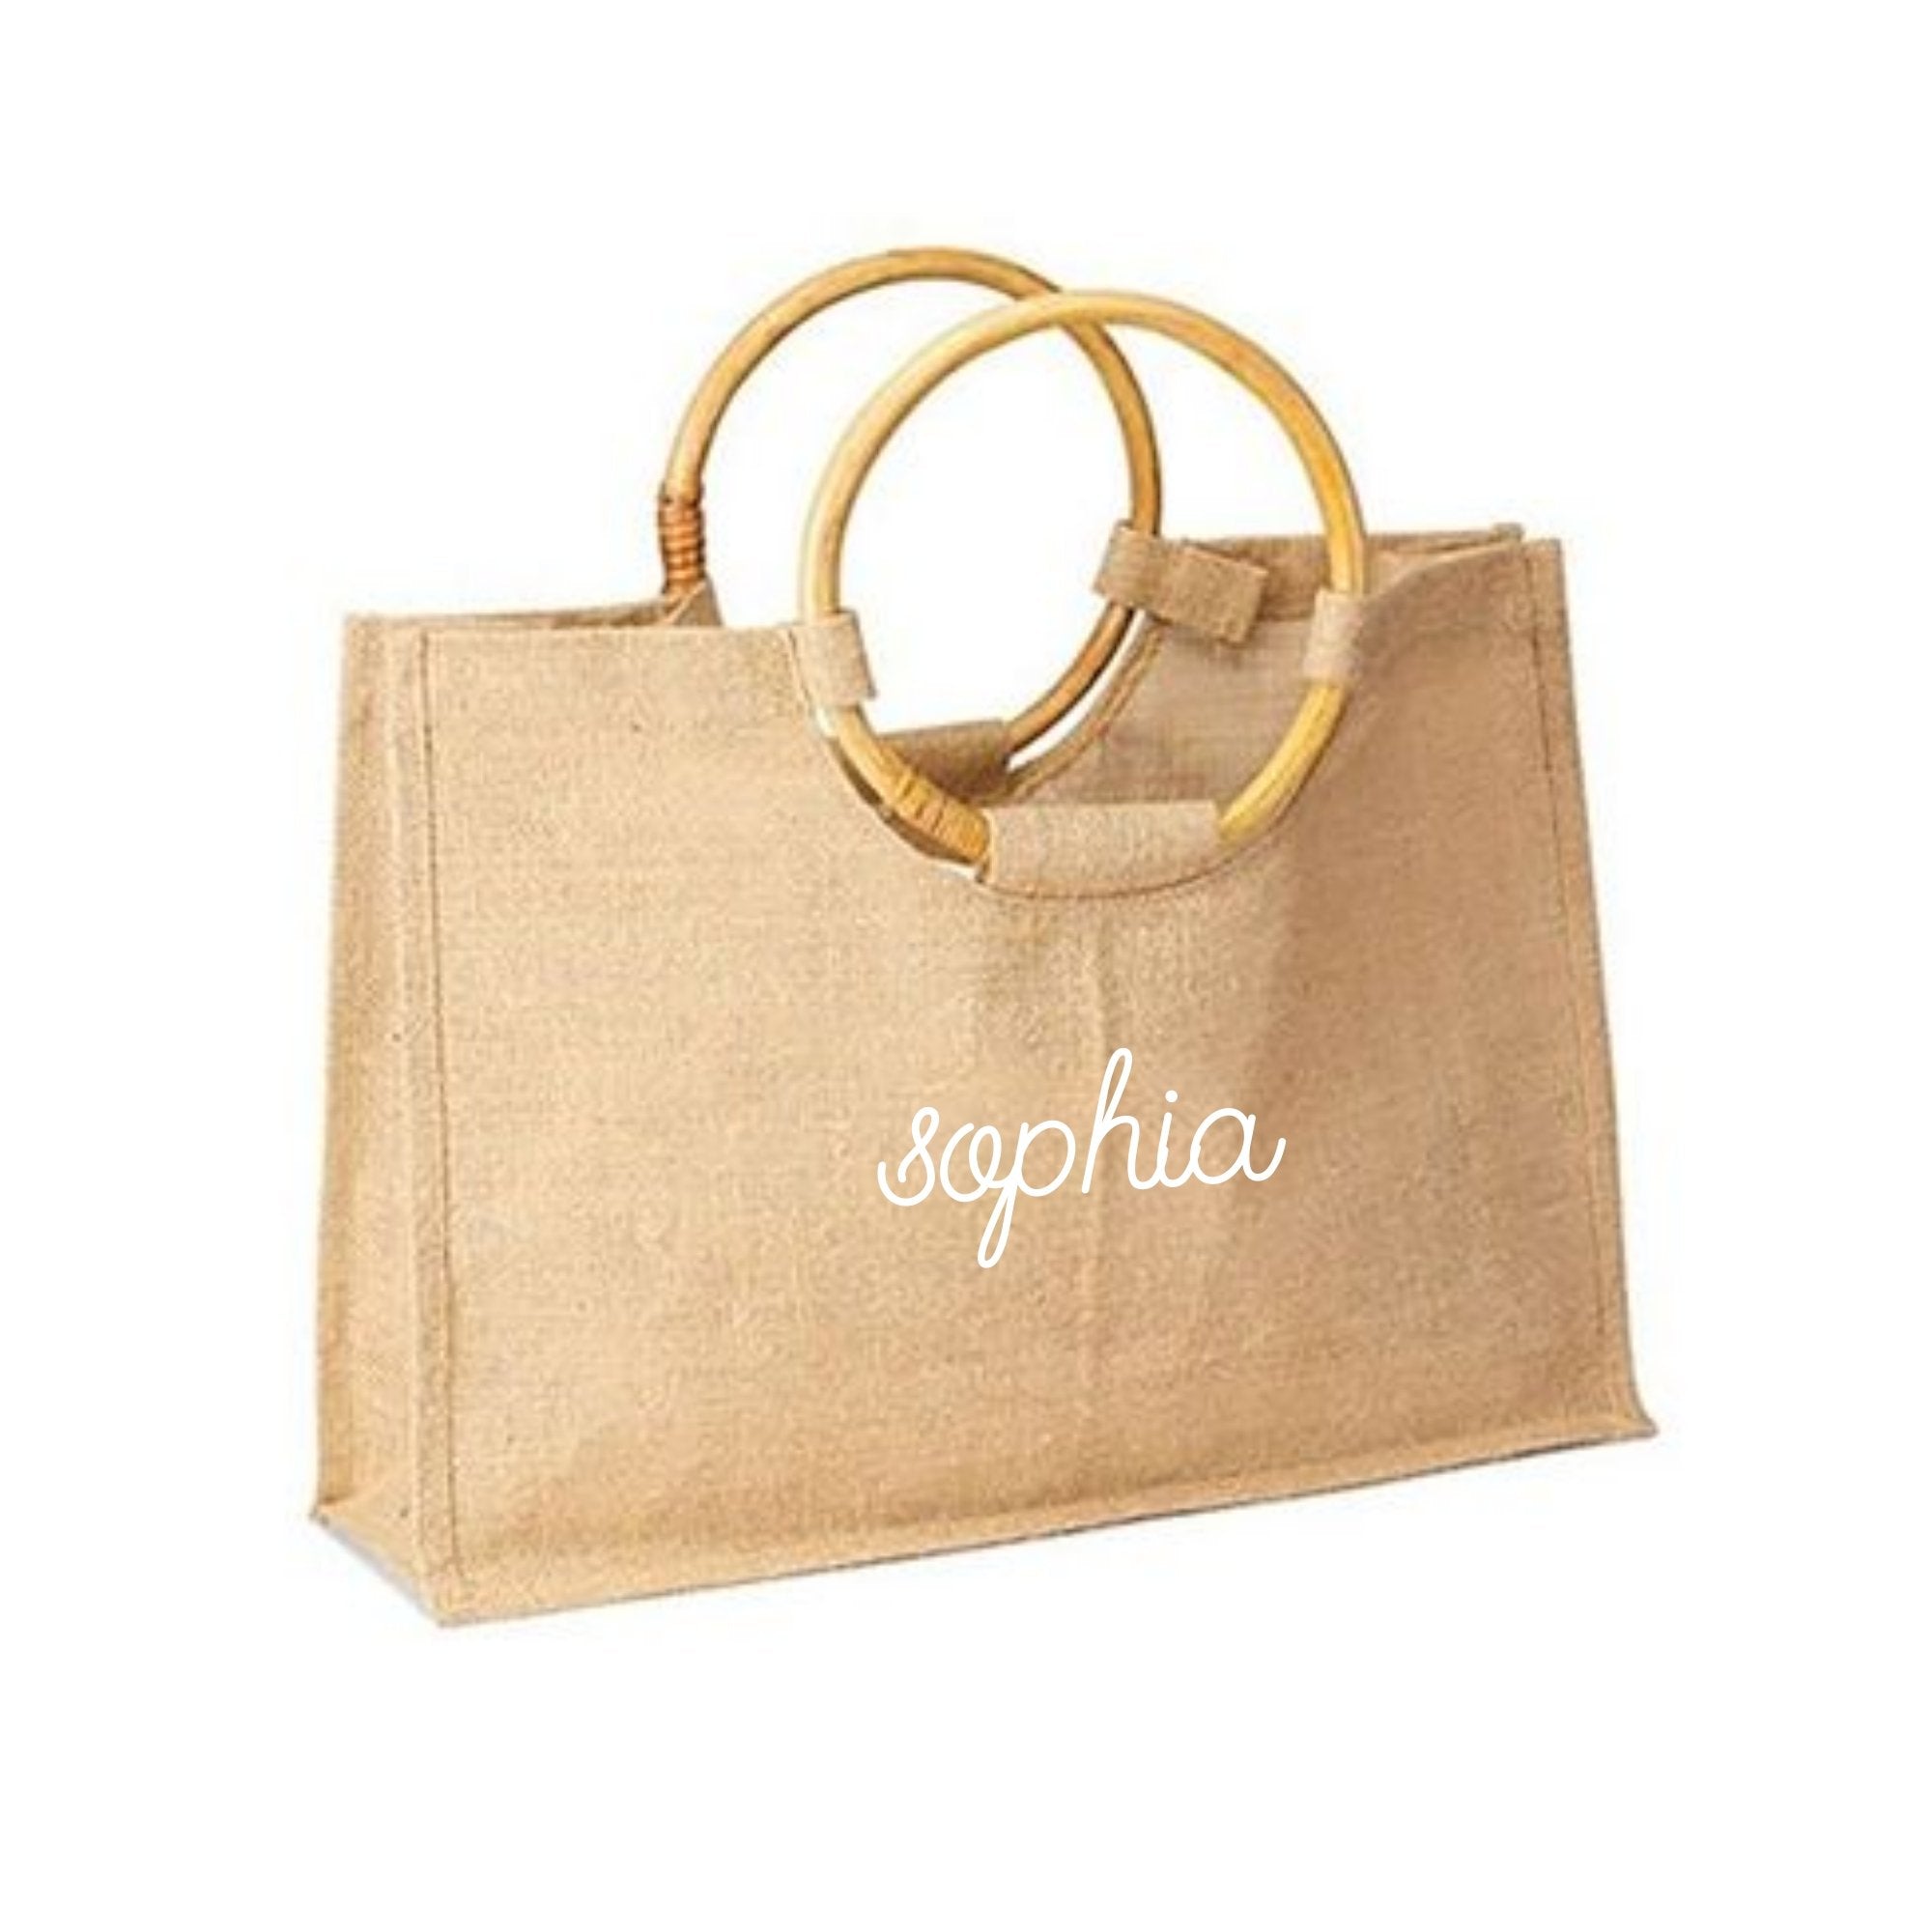 A bamboo jute is customized with a name in cursive white font